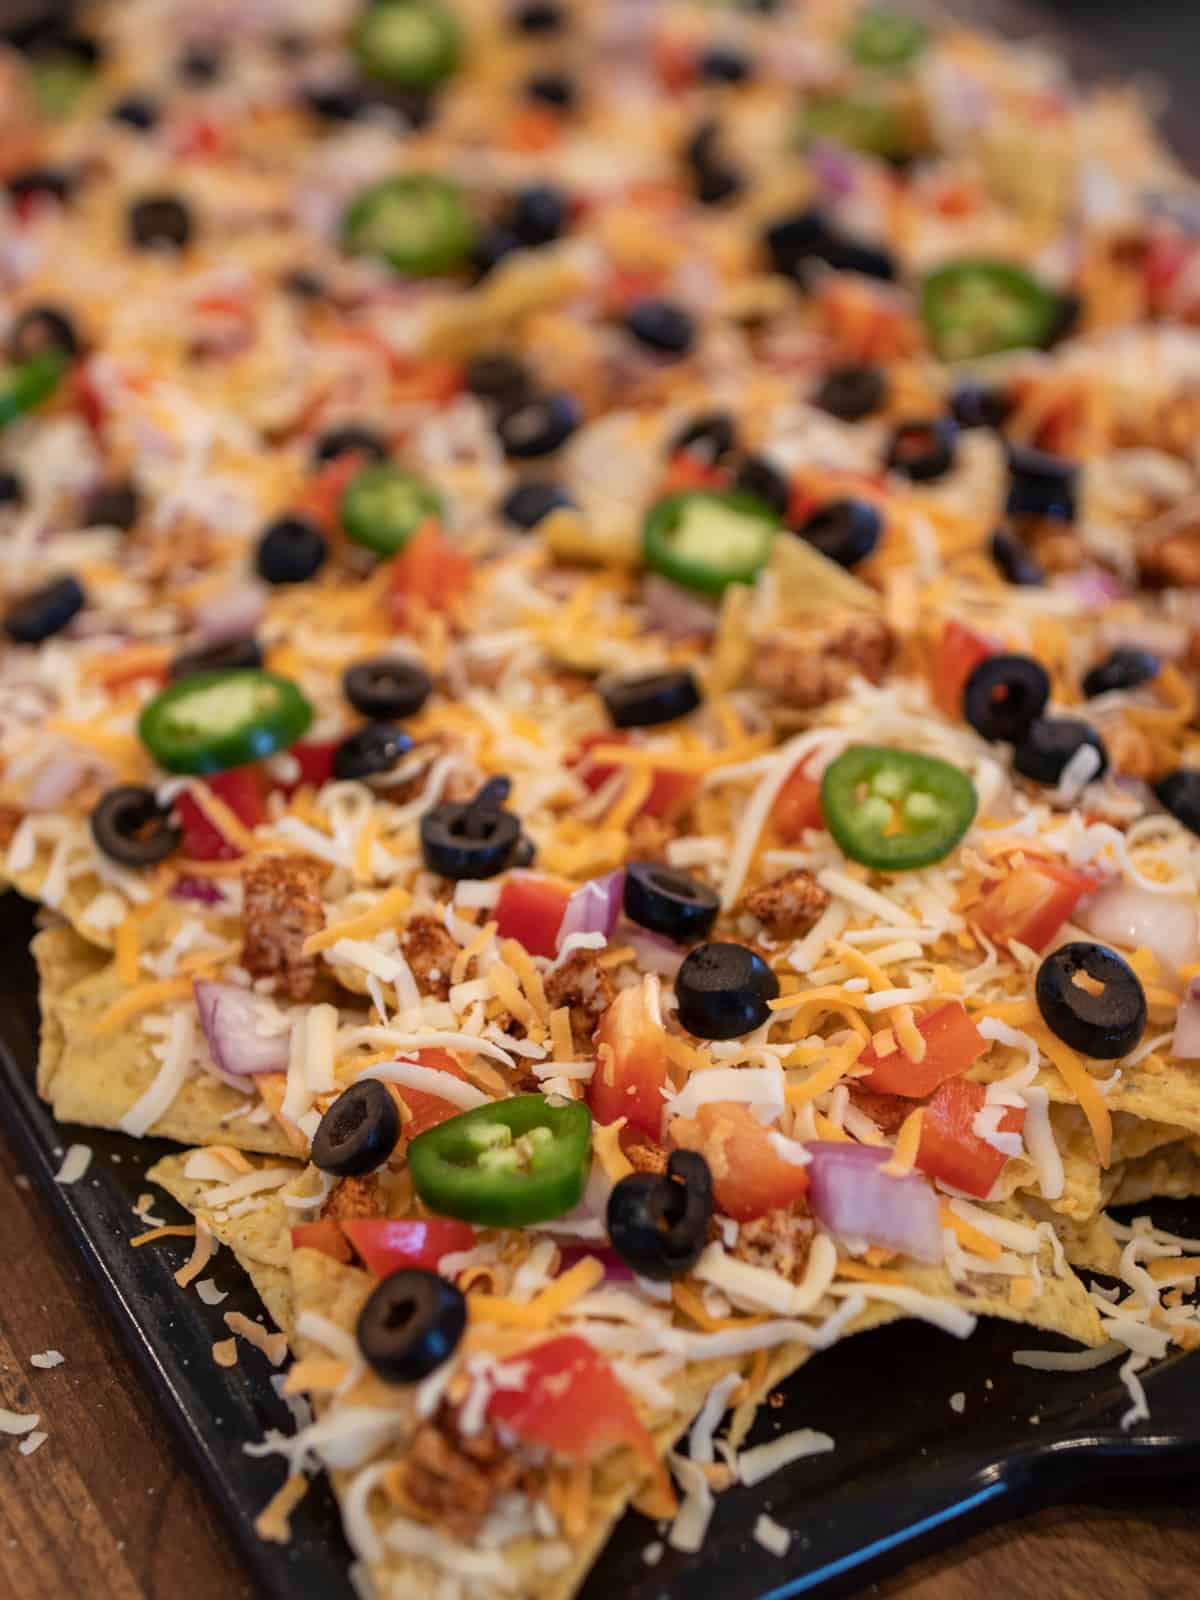 A tray of nachos ready to go into the oven.